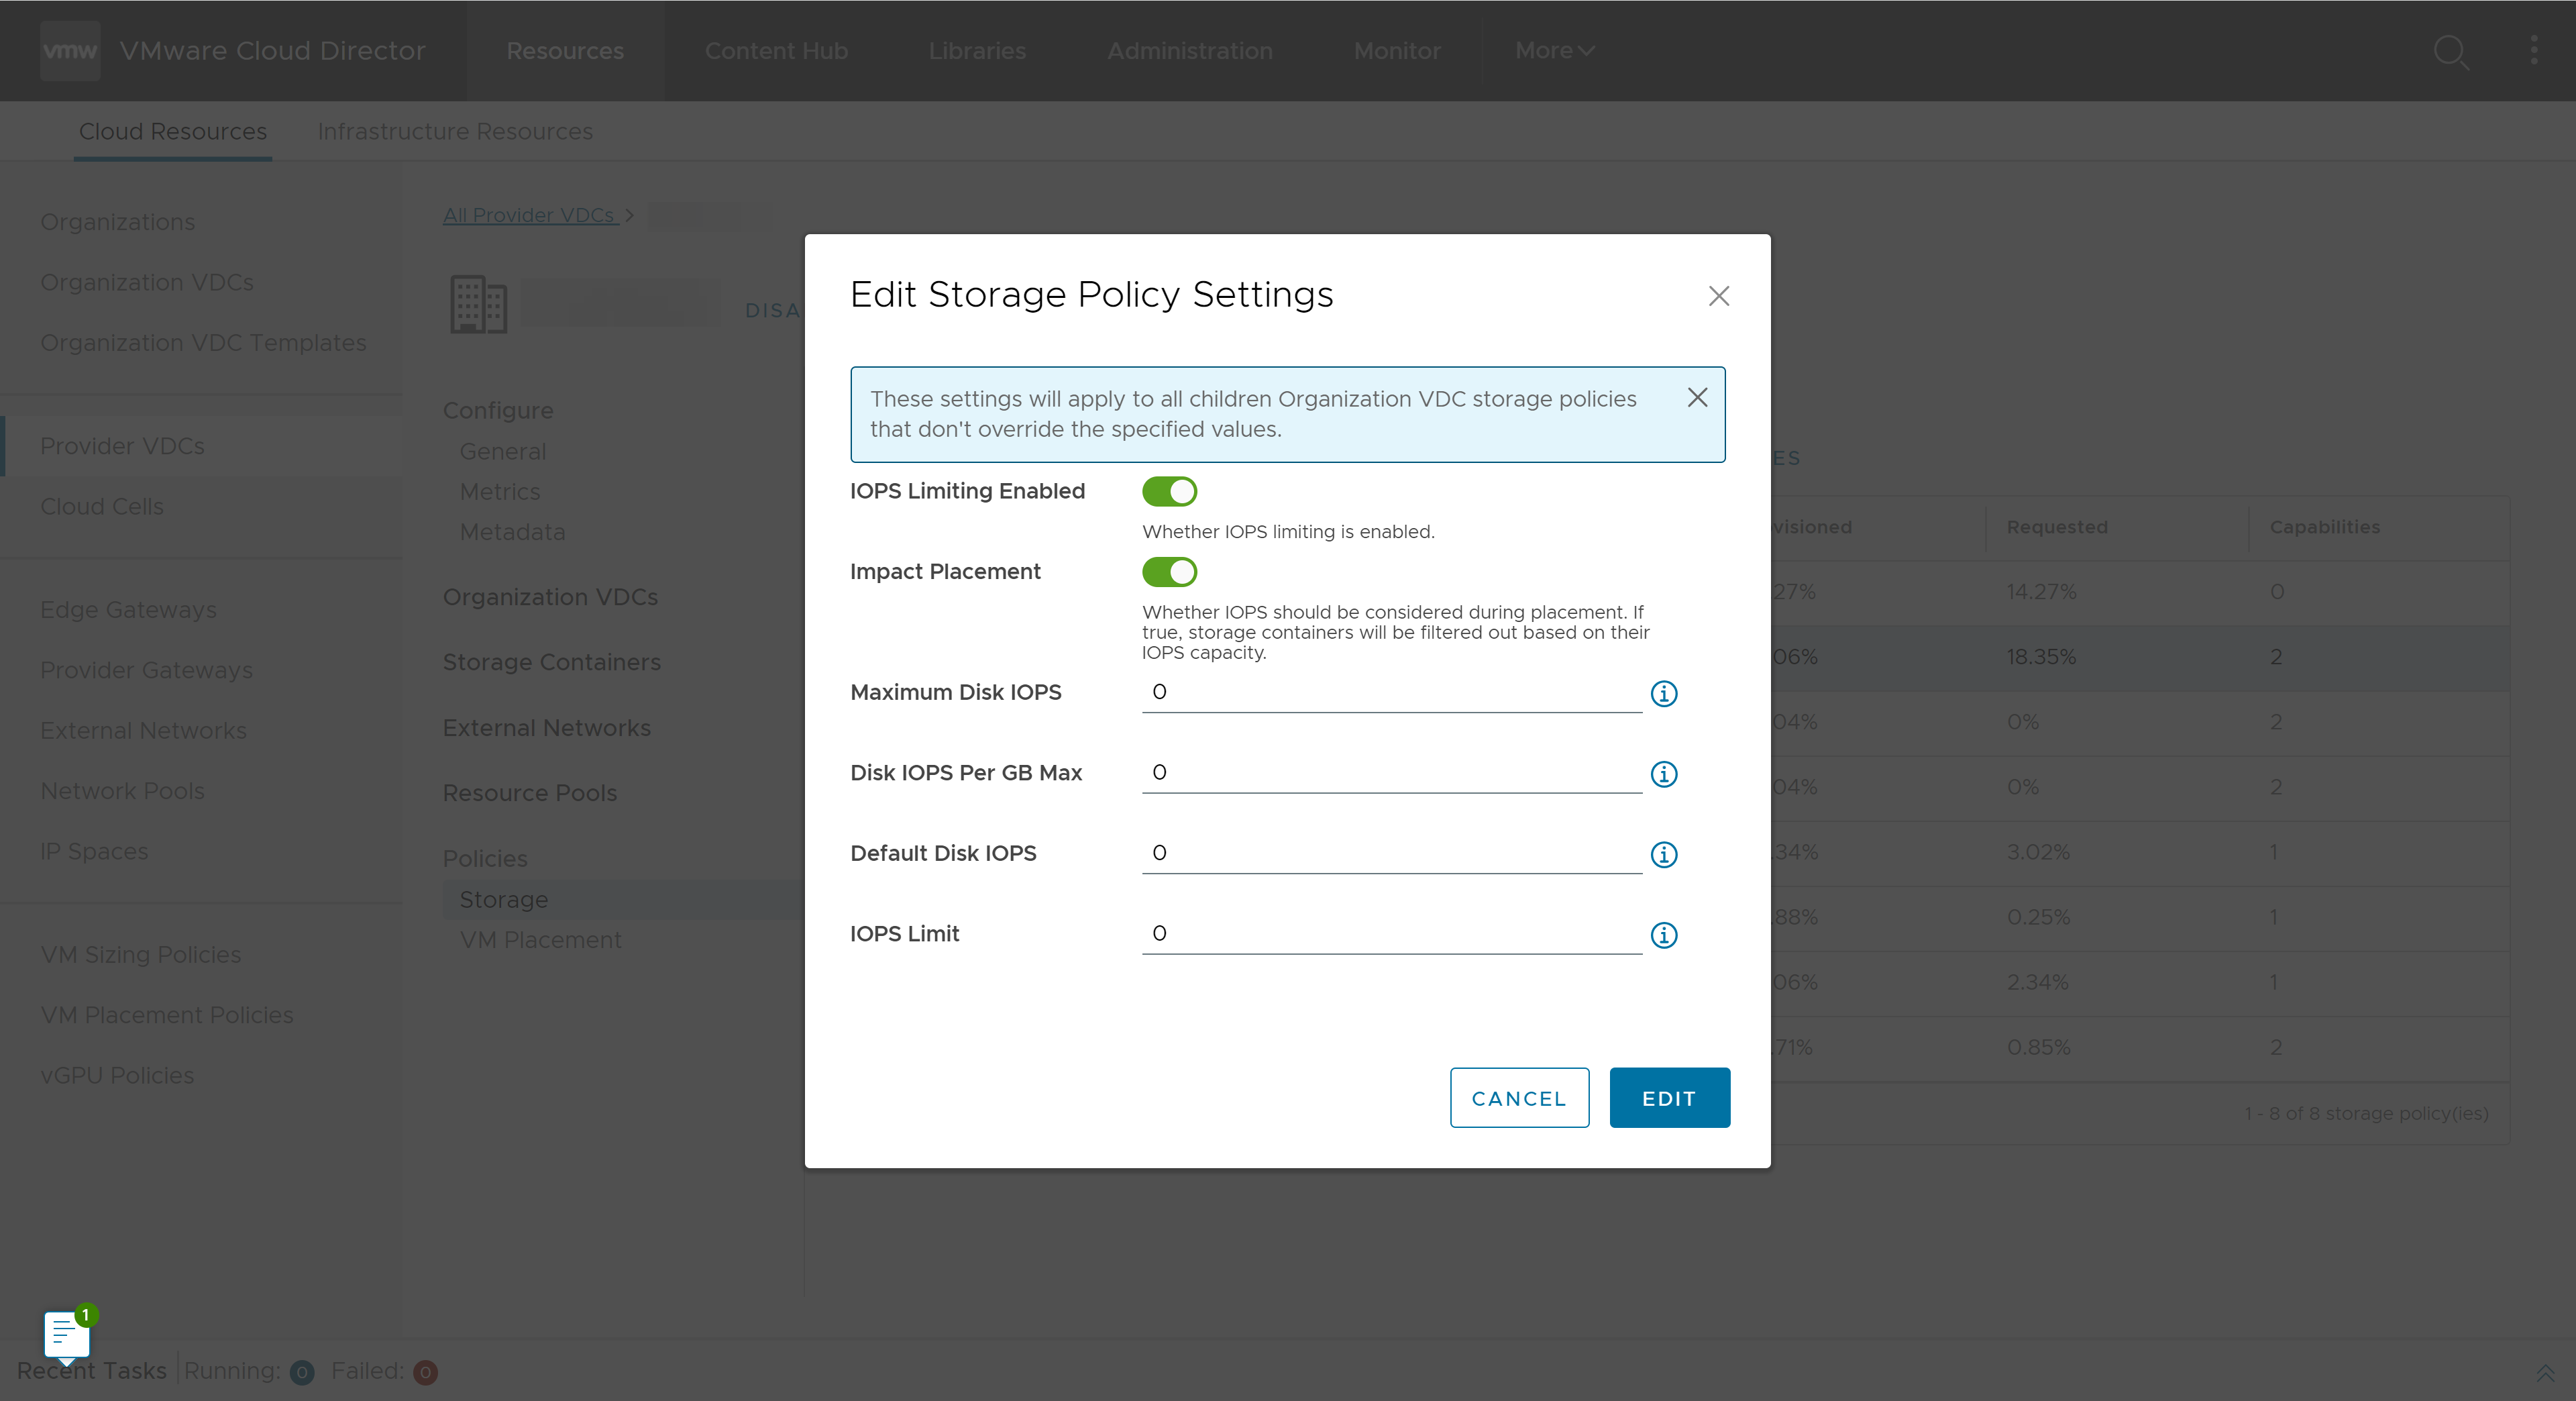 The screenshot shows the Edit Storage Policy Settings modal.